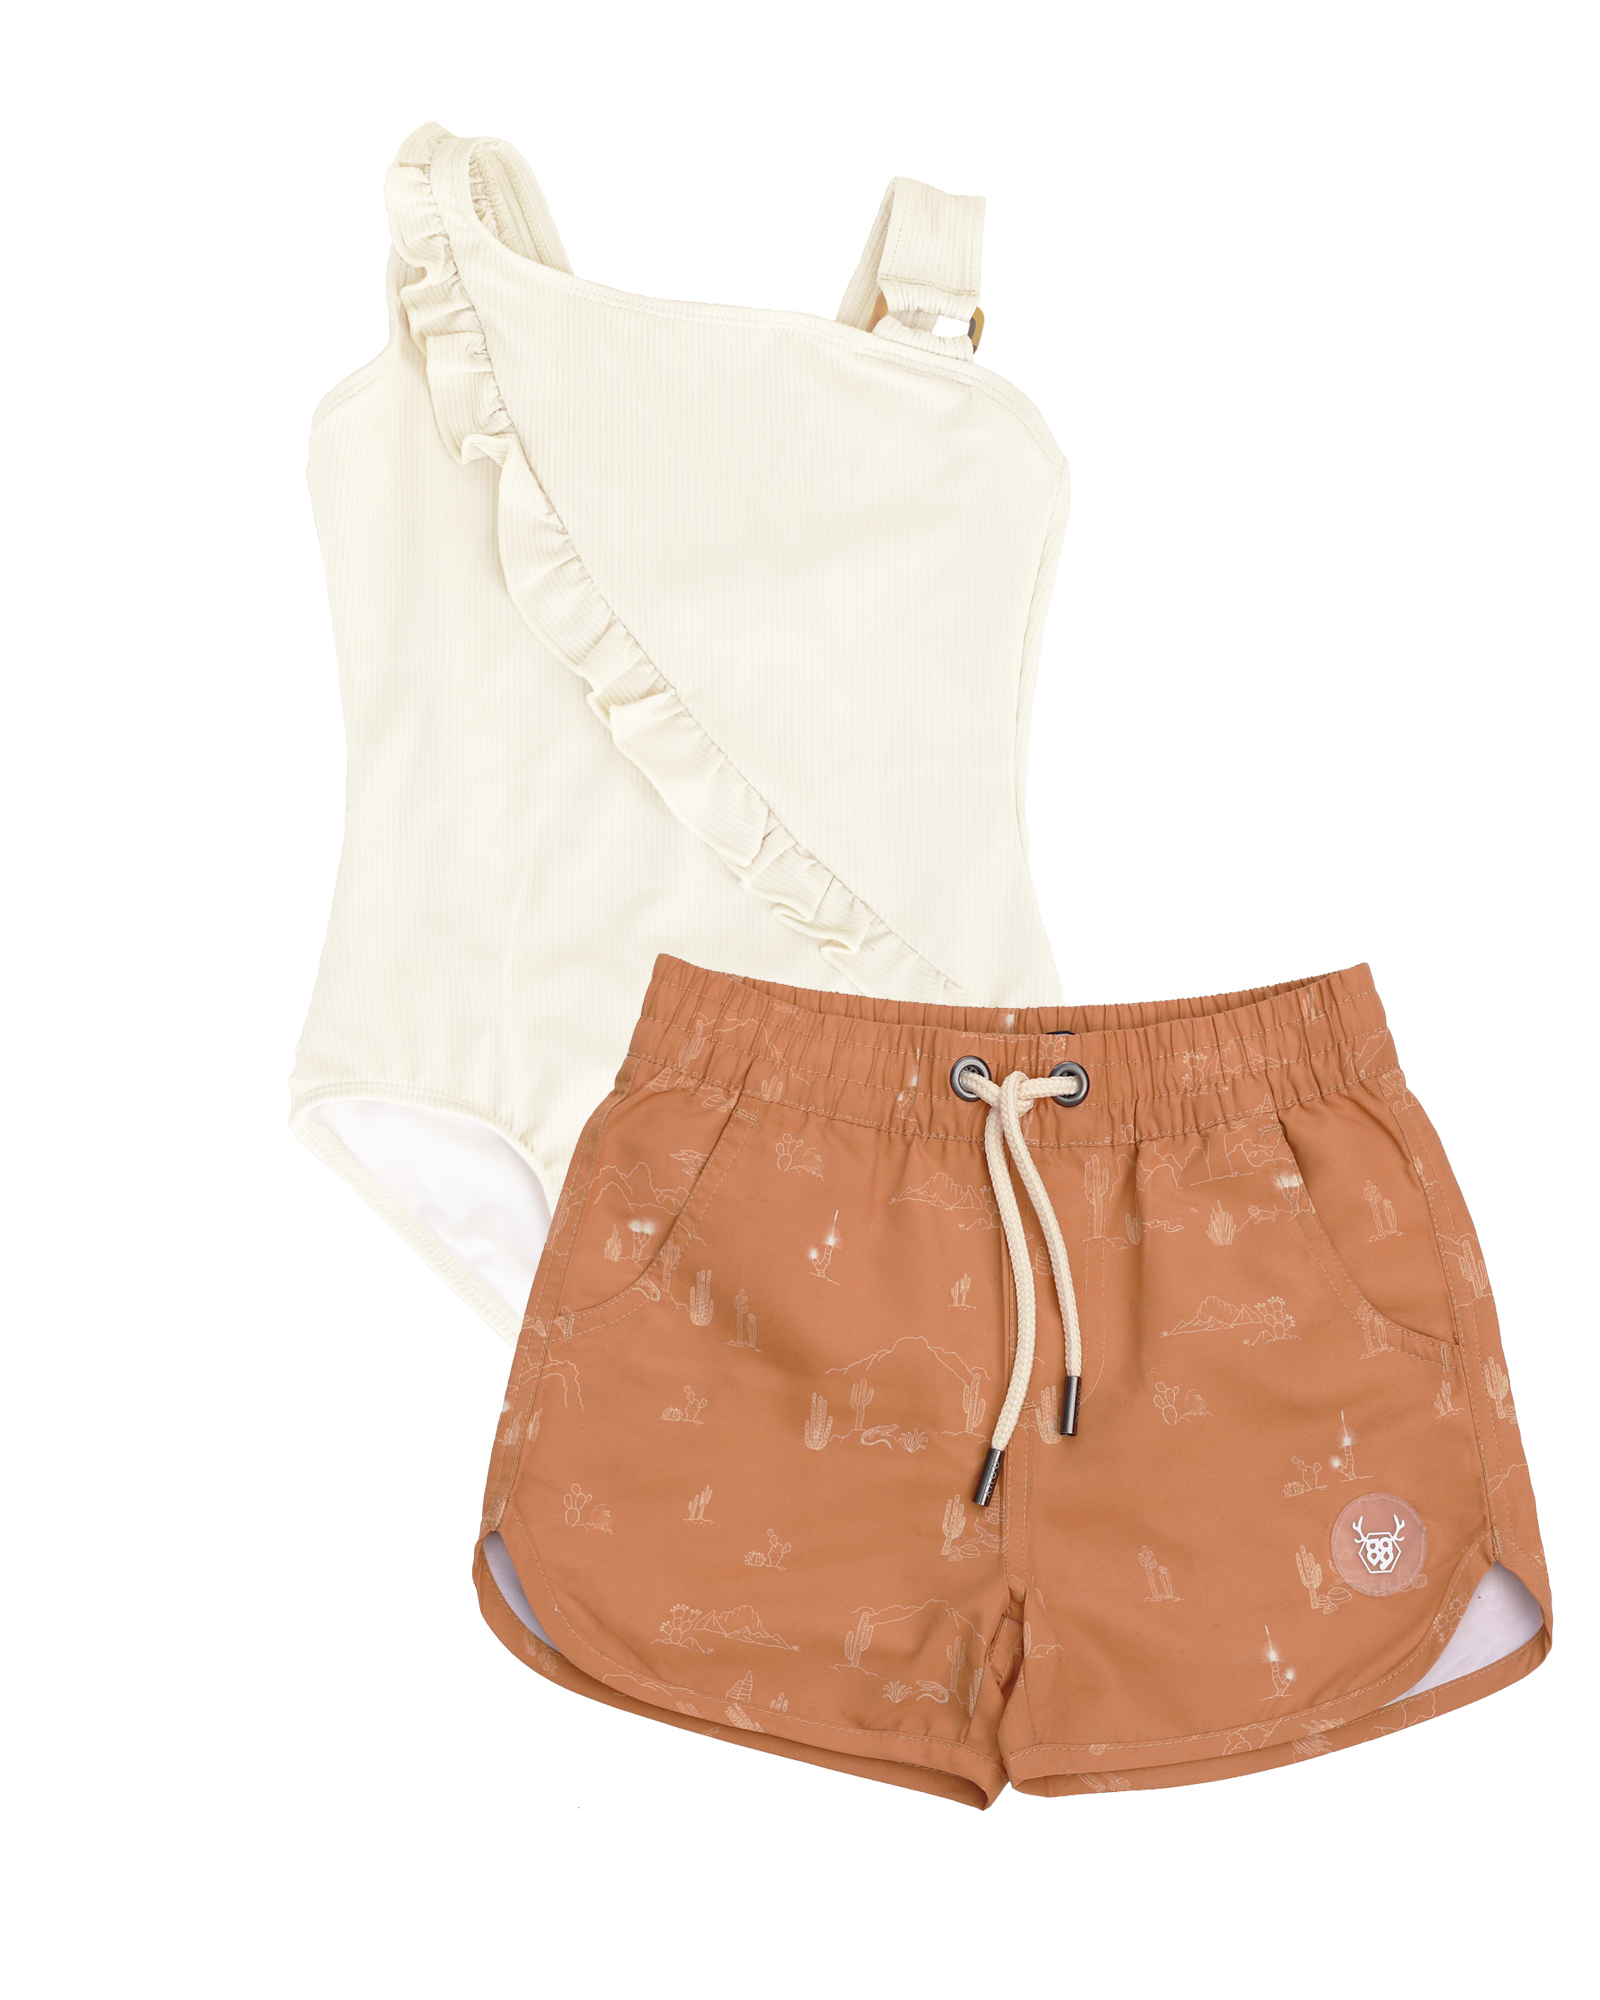 OOVY Kids Desert Boardshorts and Coconut Swimsuit Gift set